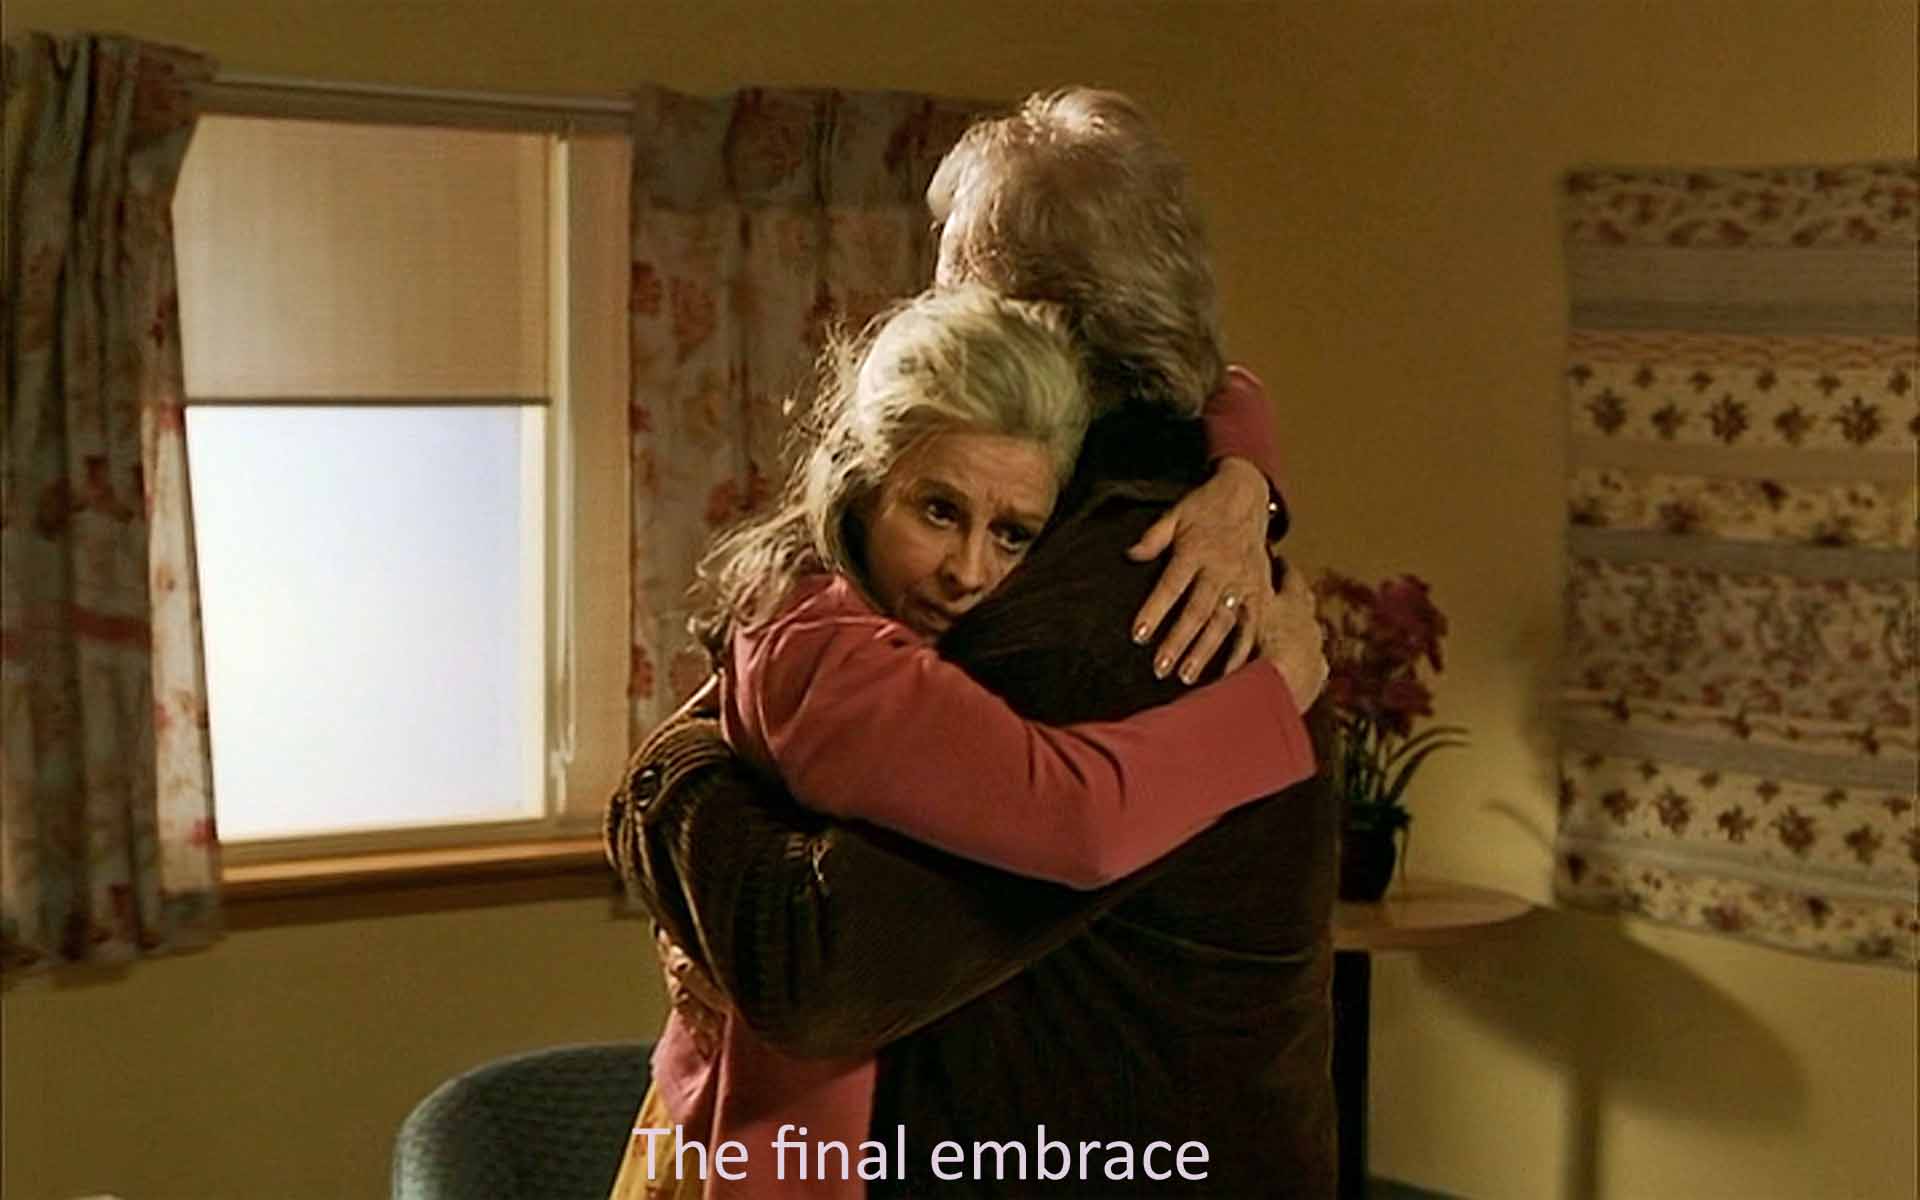 The final embrace